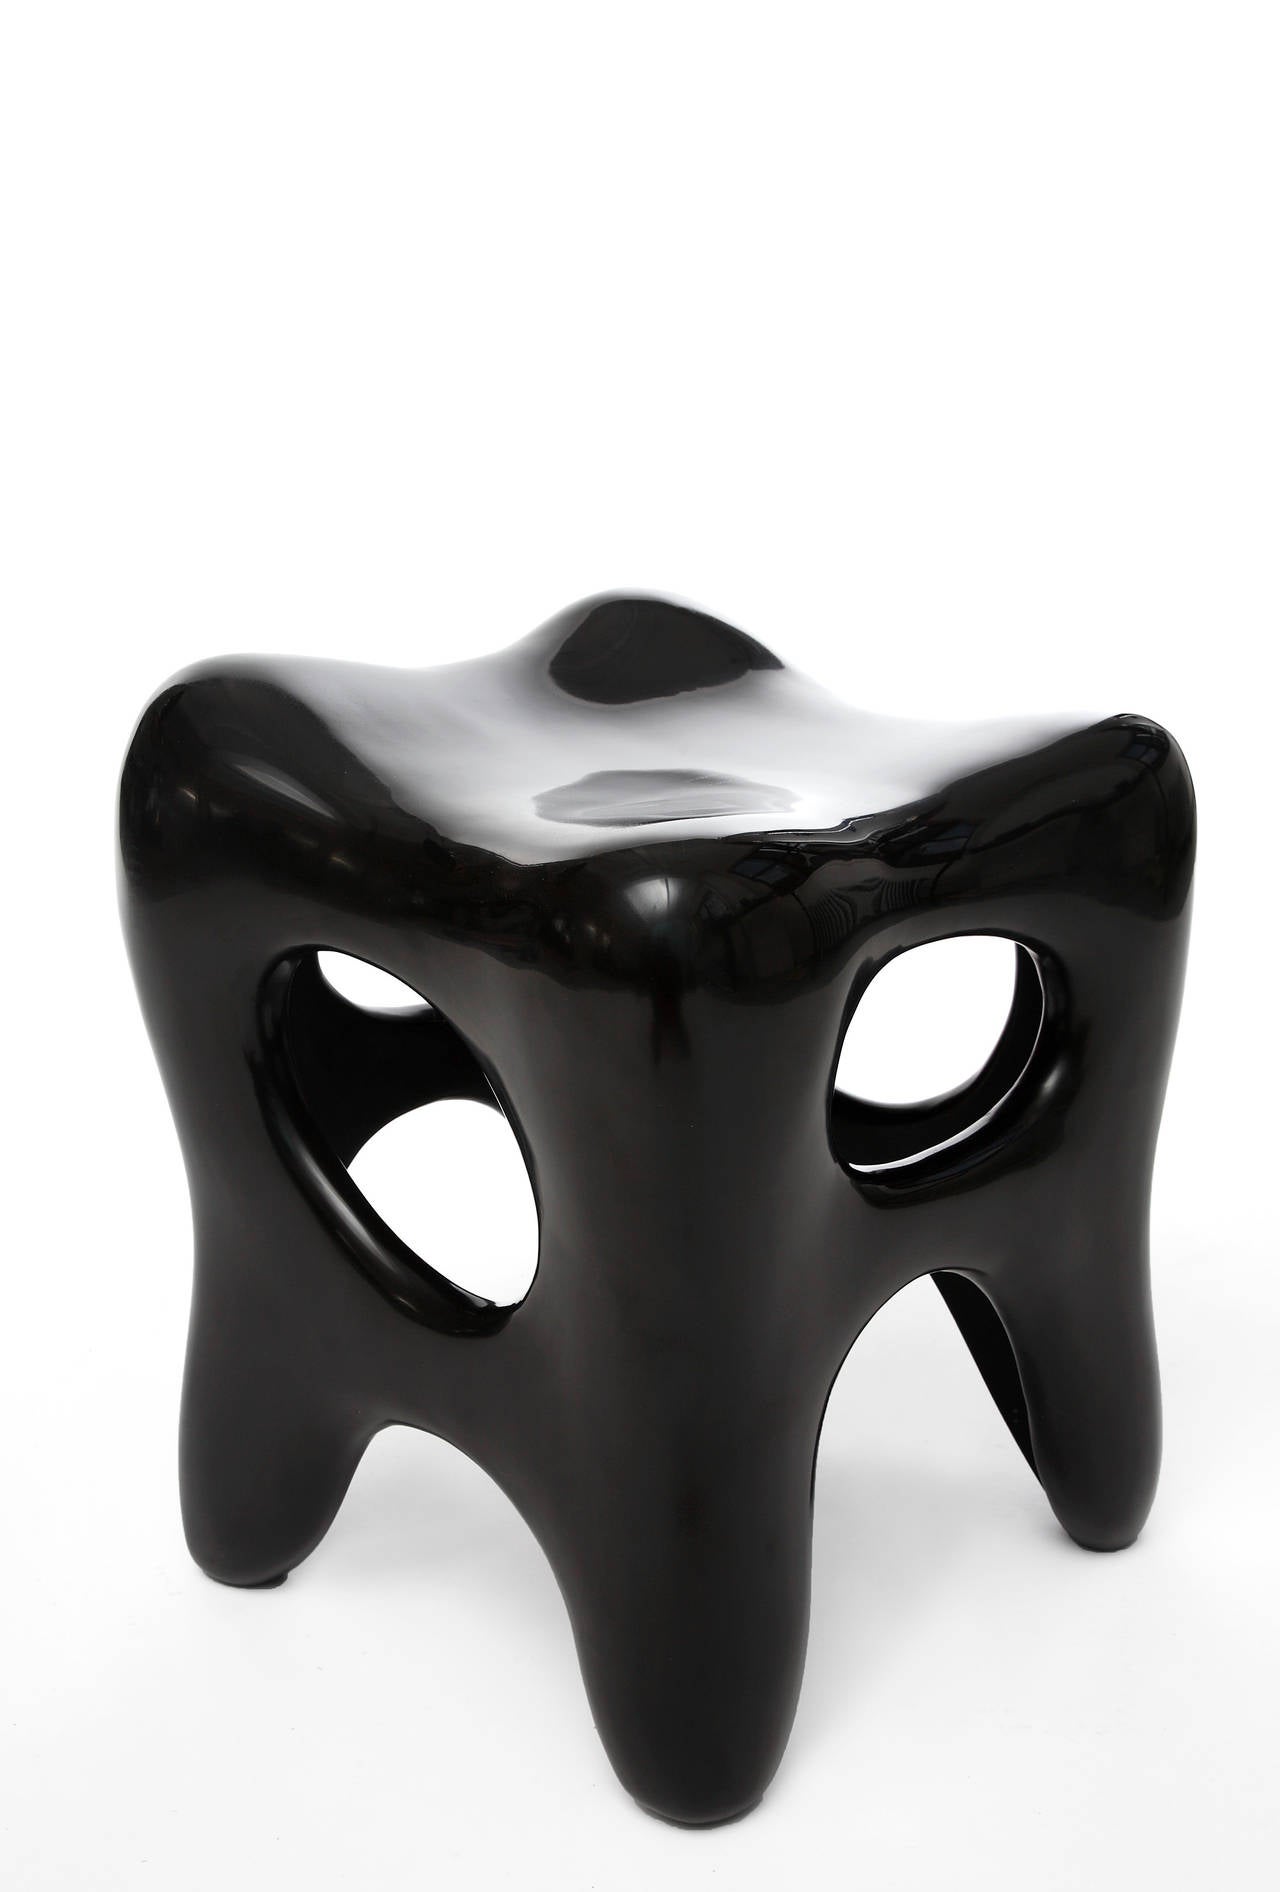 Sculpted stools made of recycled wood and finished with black lacquer.
Jacques Jarrige's iconic stool plays with positive and negative space. Each one is sculpted by hand and unique. The movement imbued creates everlasting life in the object always